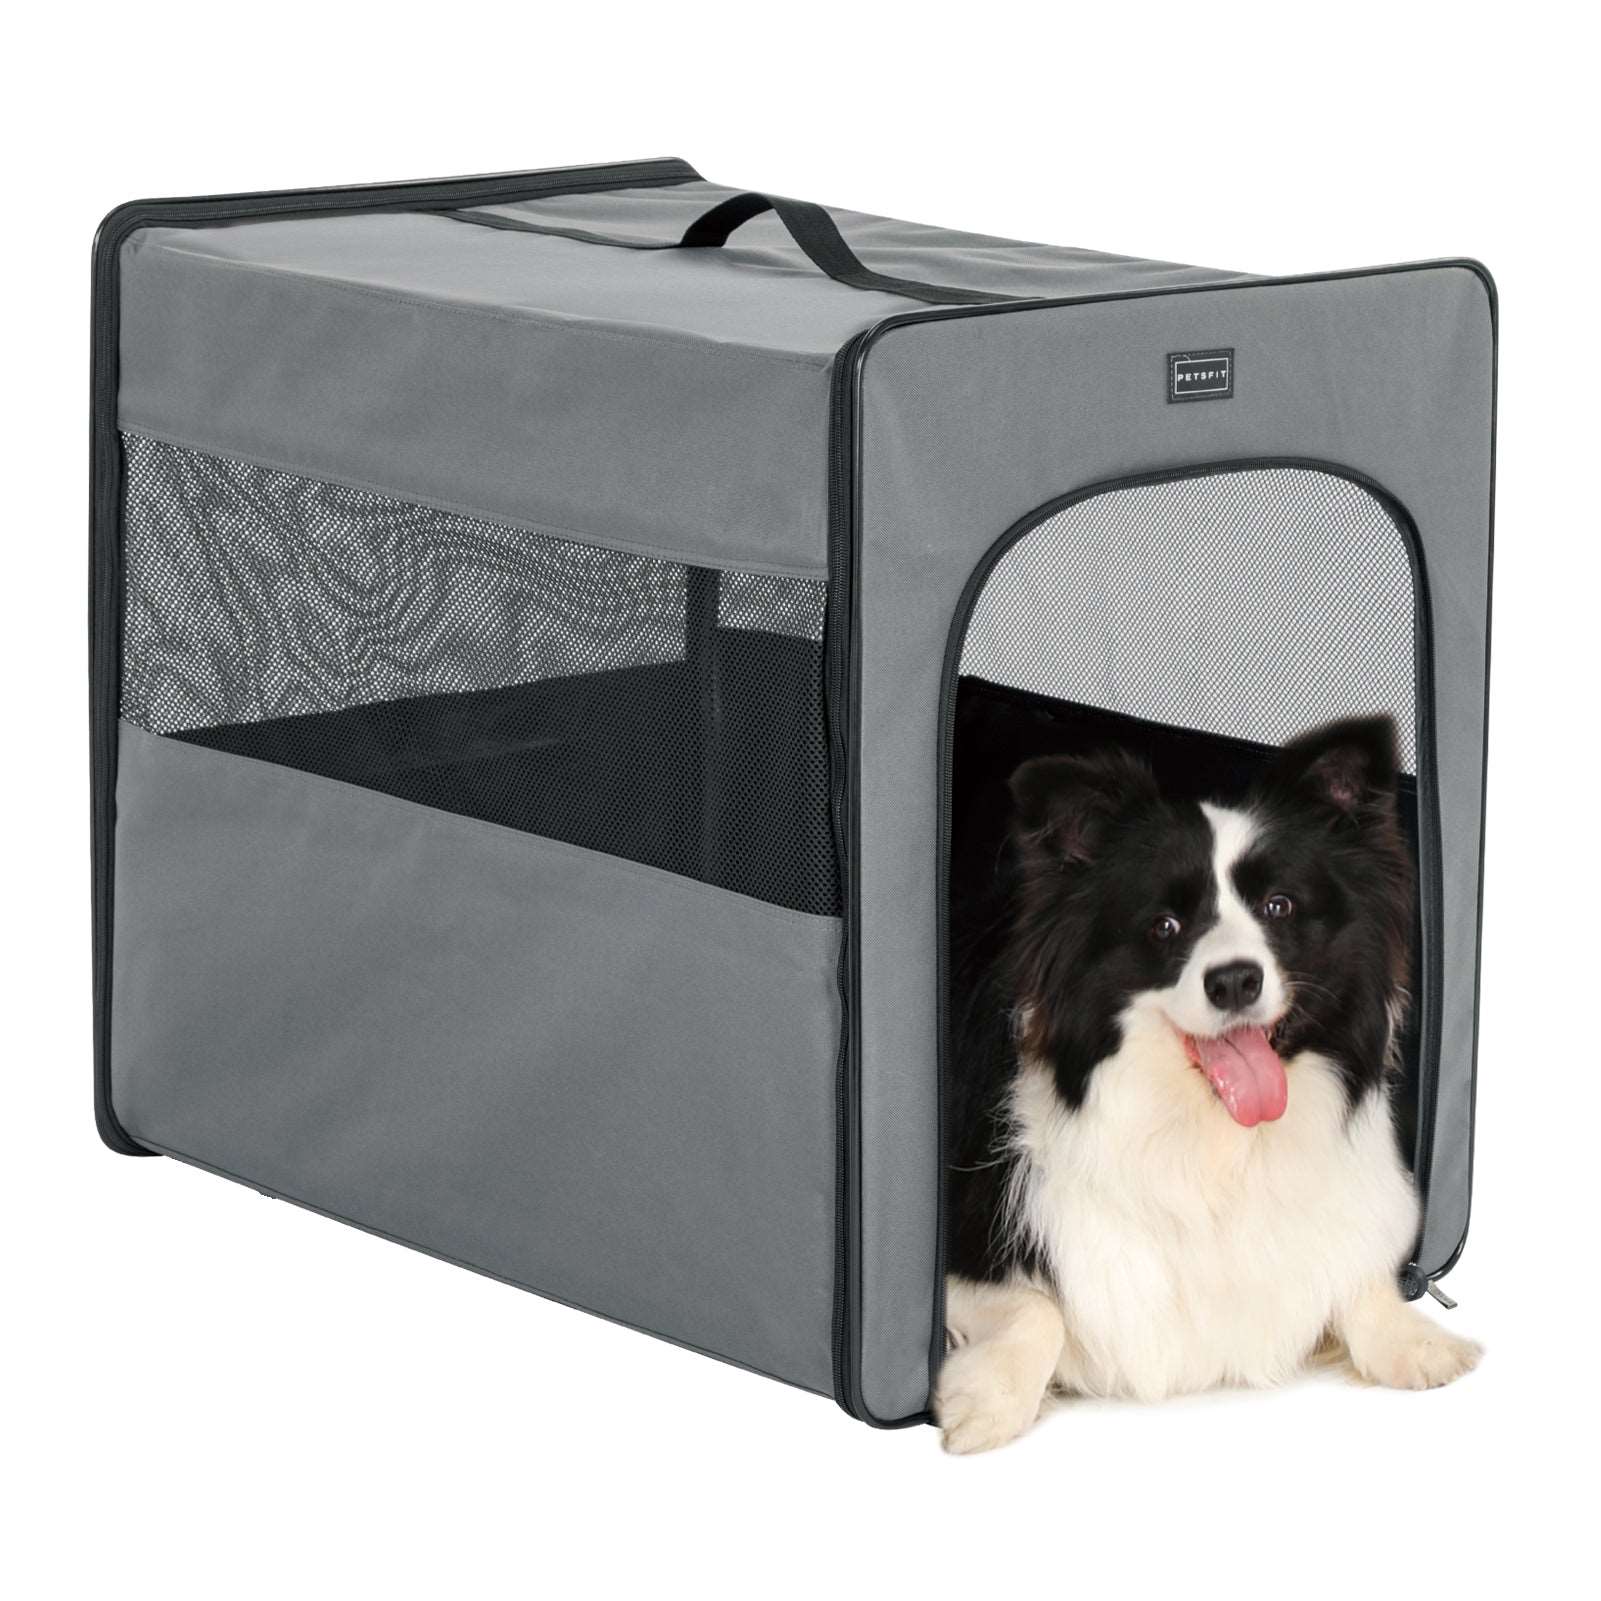 Petsfit-Portable-Dog-Crate-24-Inch-09